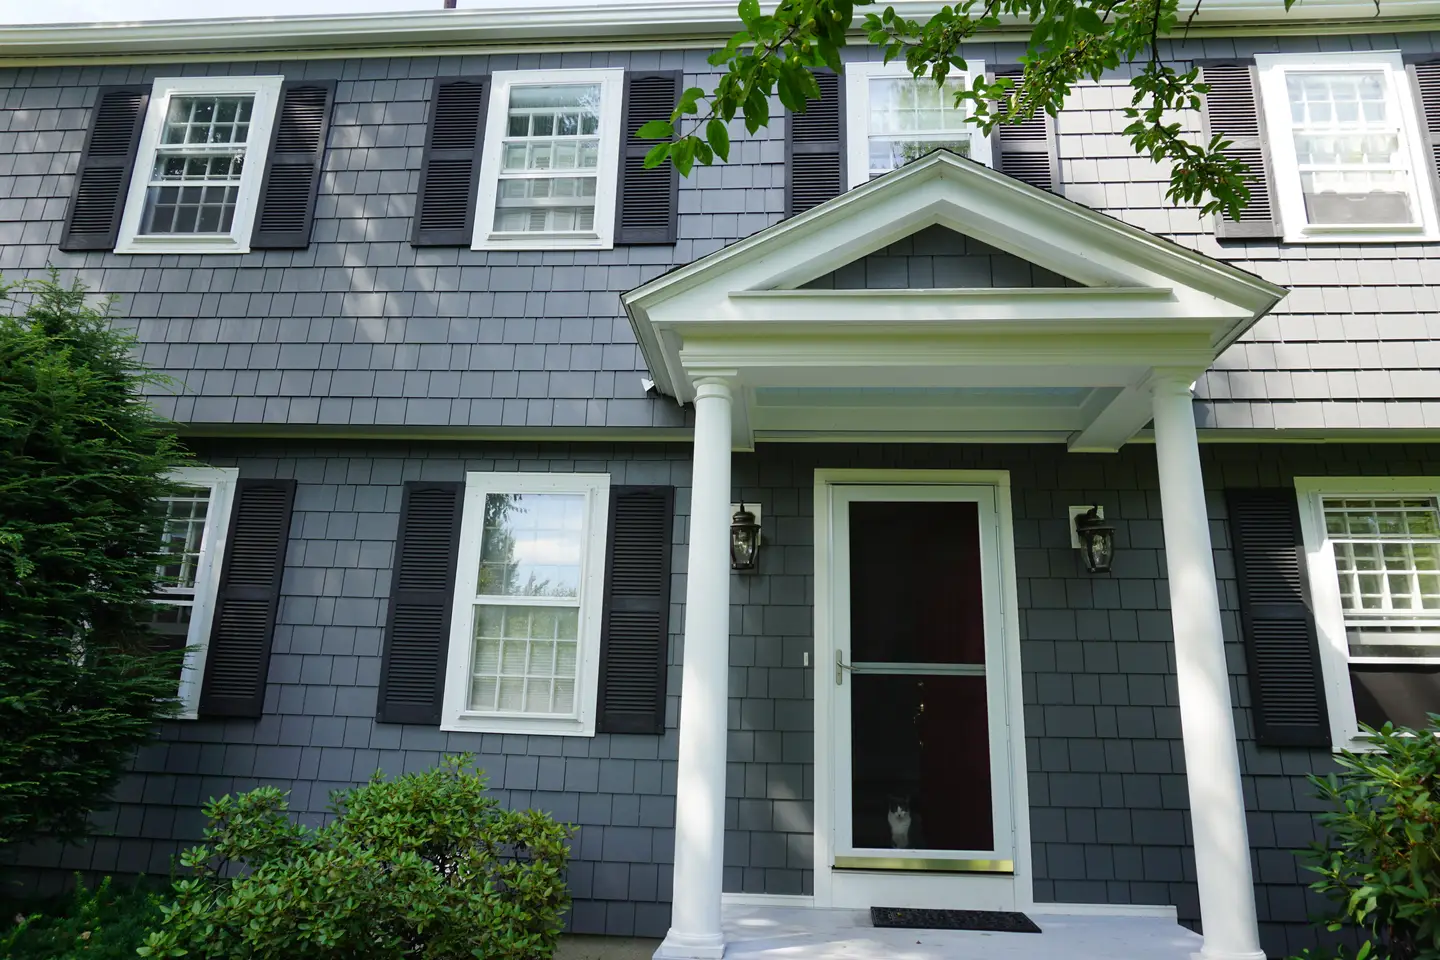 Upgrade your Acton, MA home with durable and stylish James Hardie siding from Solid State Construction, the trusted siding contractor in Middlesex County.